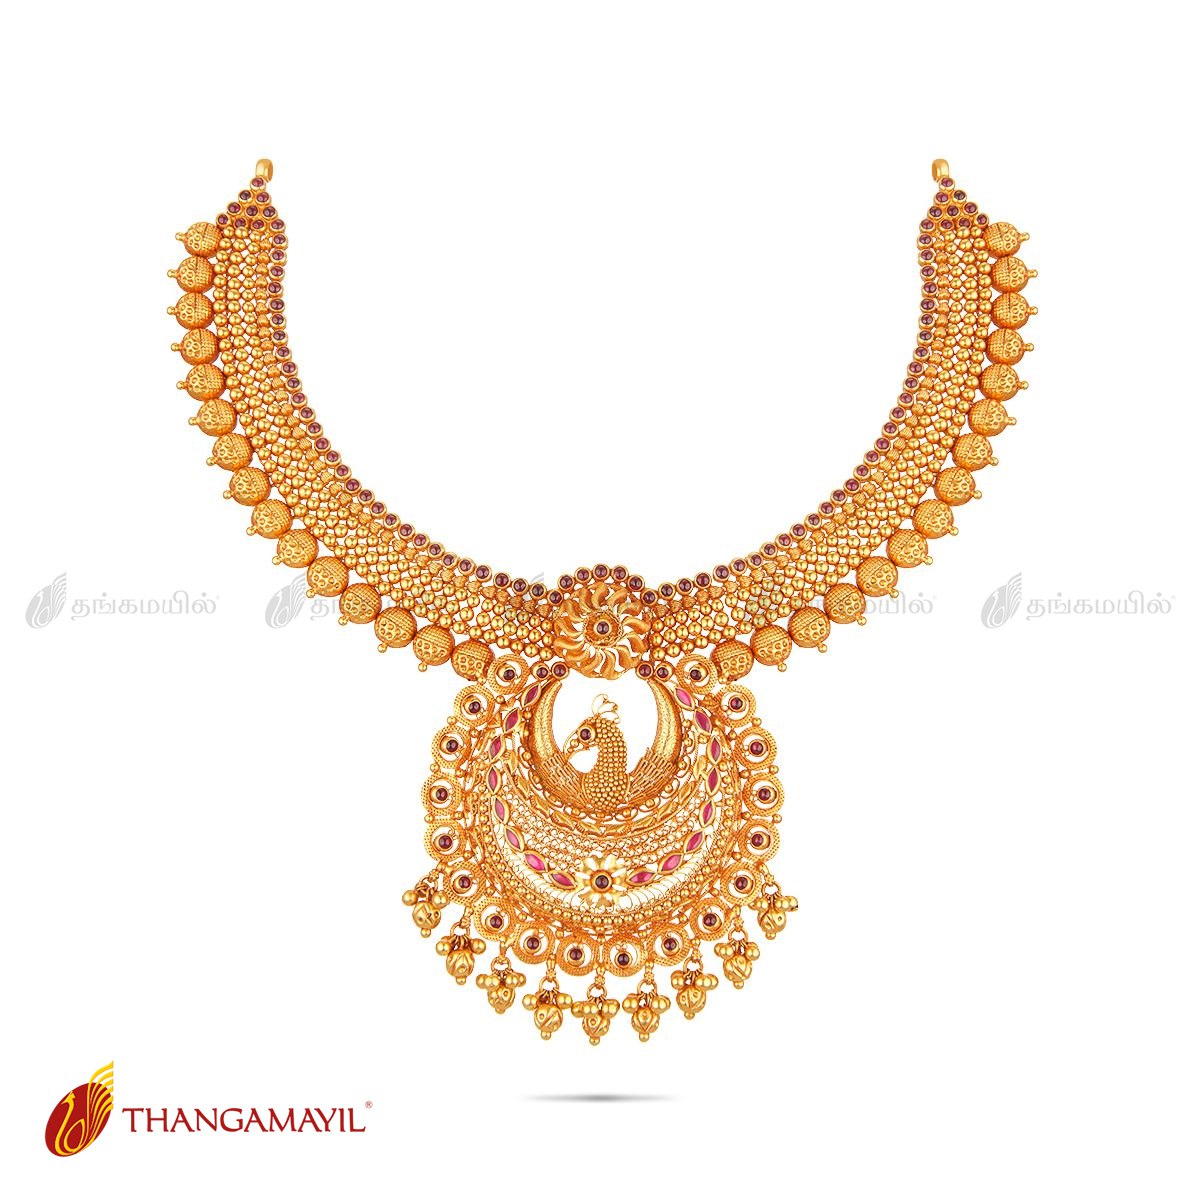 THANGAMAYIL JEWELLERY.....

Product Name: Exciting Fancy Gold Necklace

Gross Weight: 52.700 Gms

Available Showroom: ARUPPUKOTTAI

🛍BUY NOW

CONTACT MORE DETAILS:
1800 889 7080.